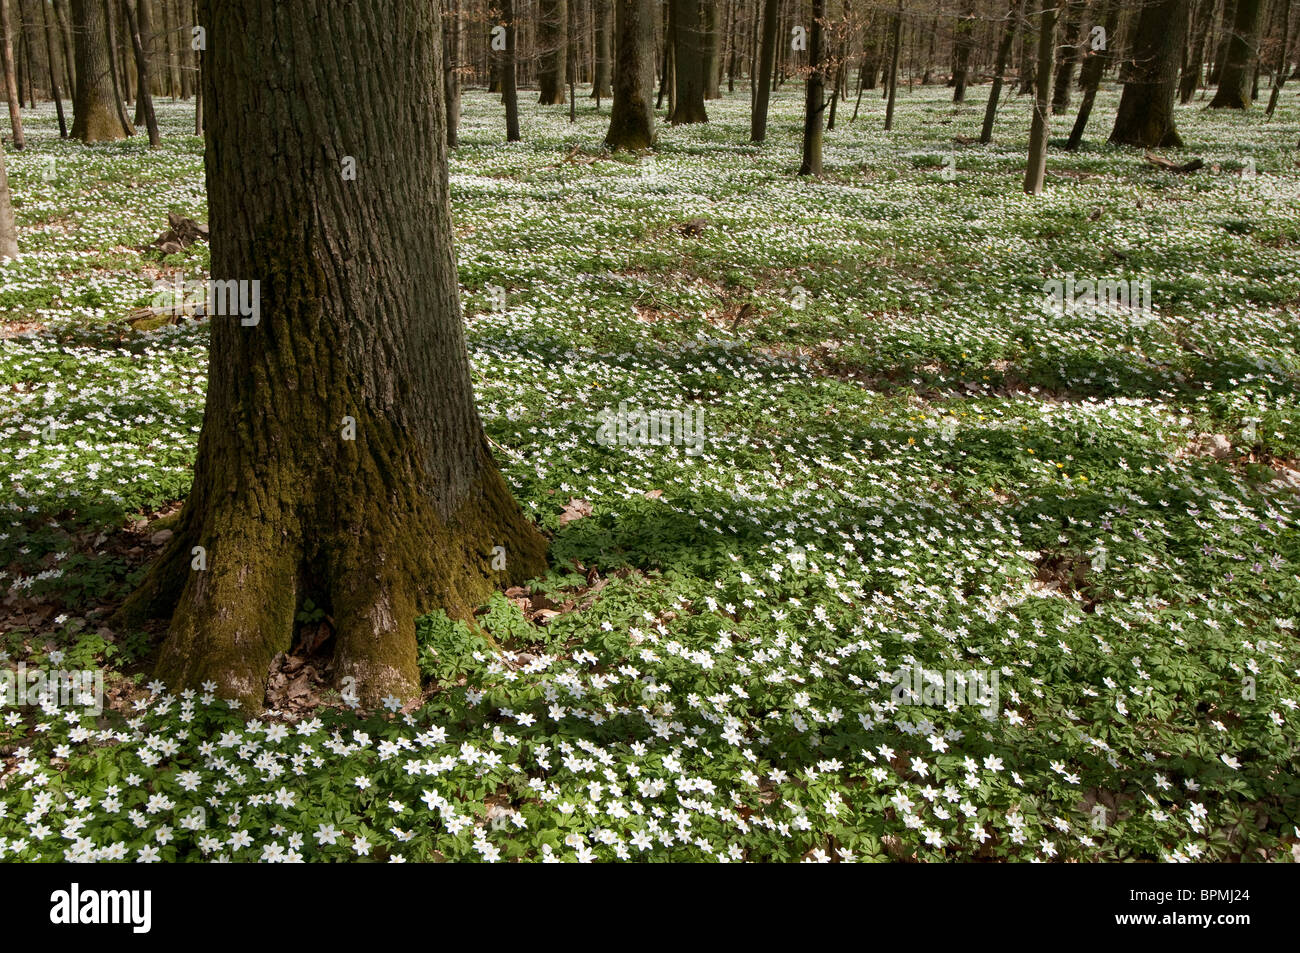 Wood Anemone (Anemone nemorosa). Flowering plants covering the floor of a beech wood in spring. Stock Photo